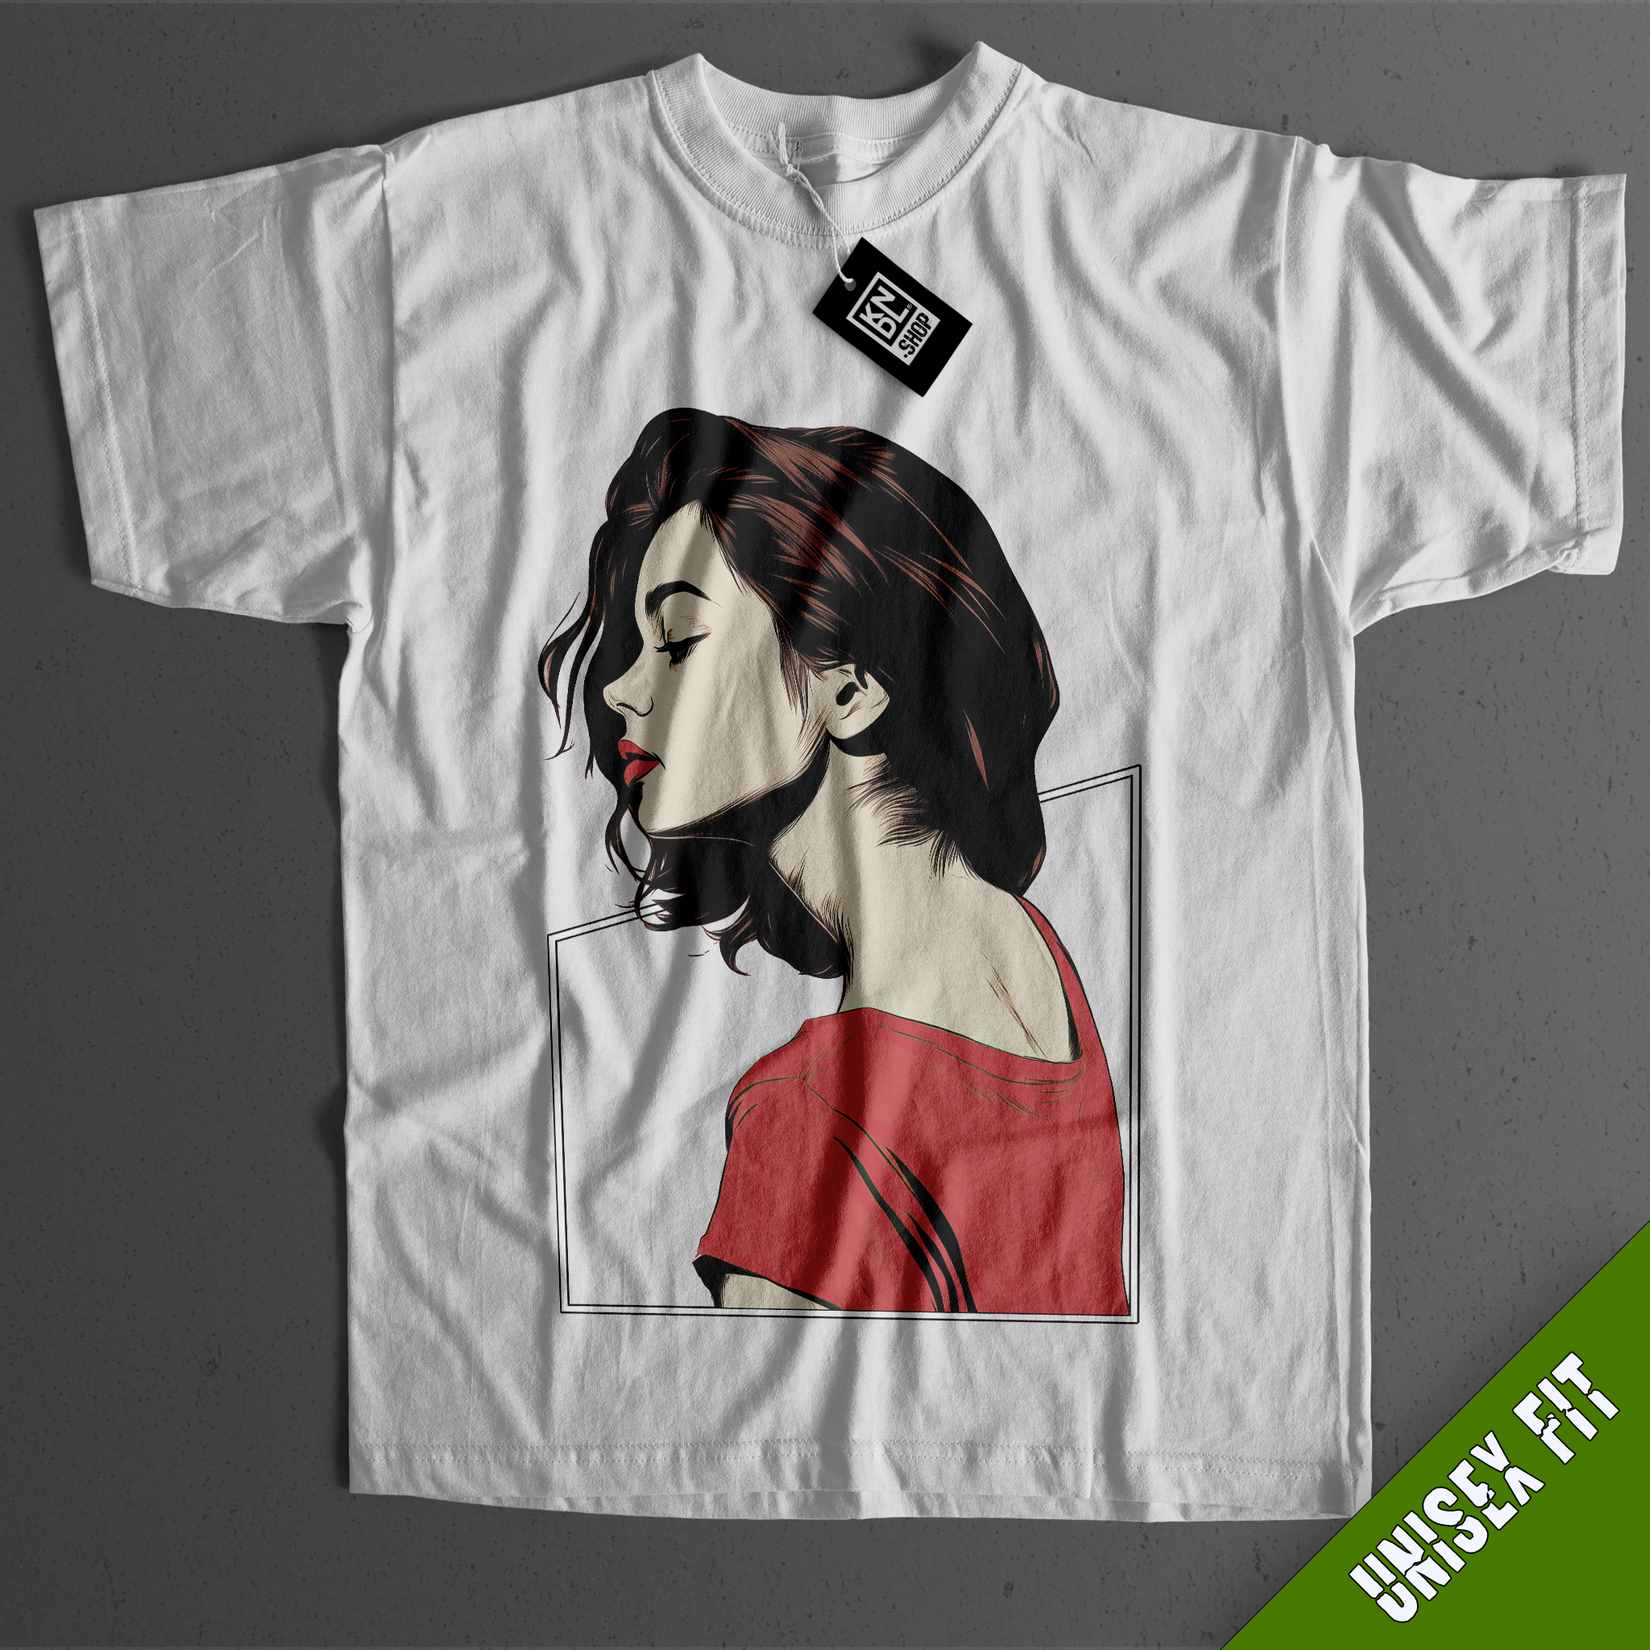 a white t - shirt with a picture of a woman's face